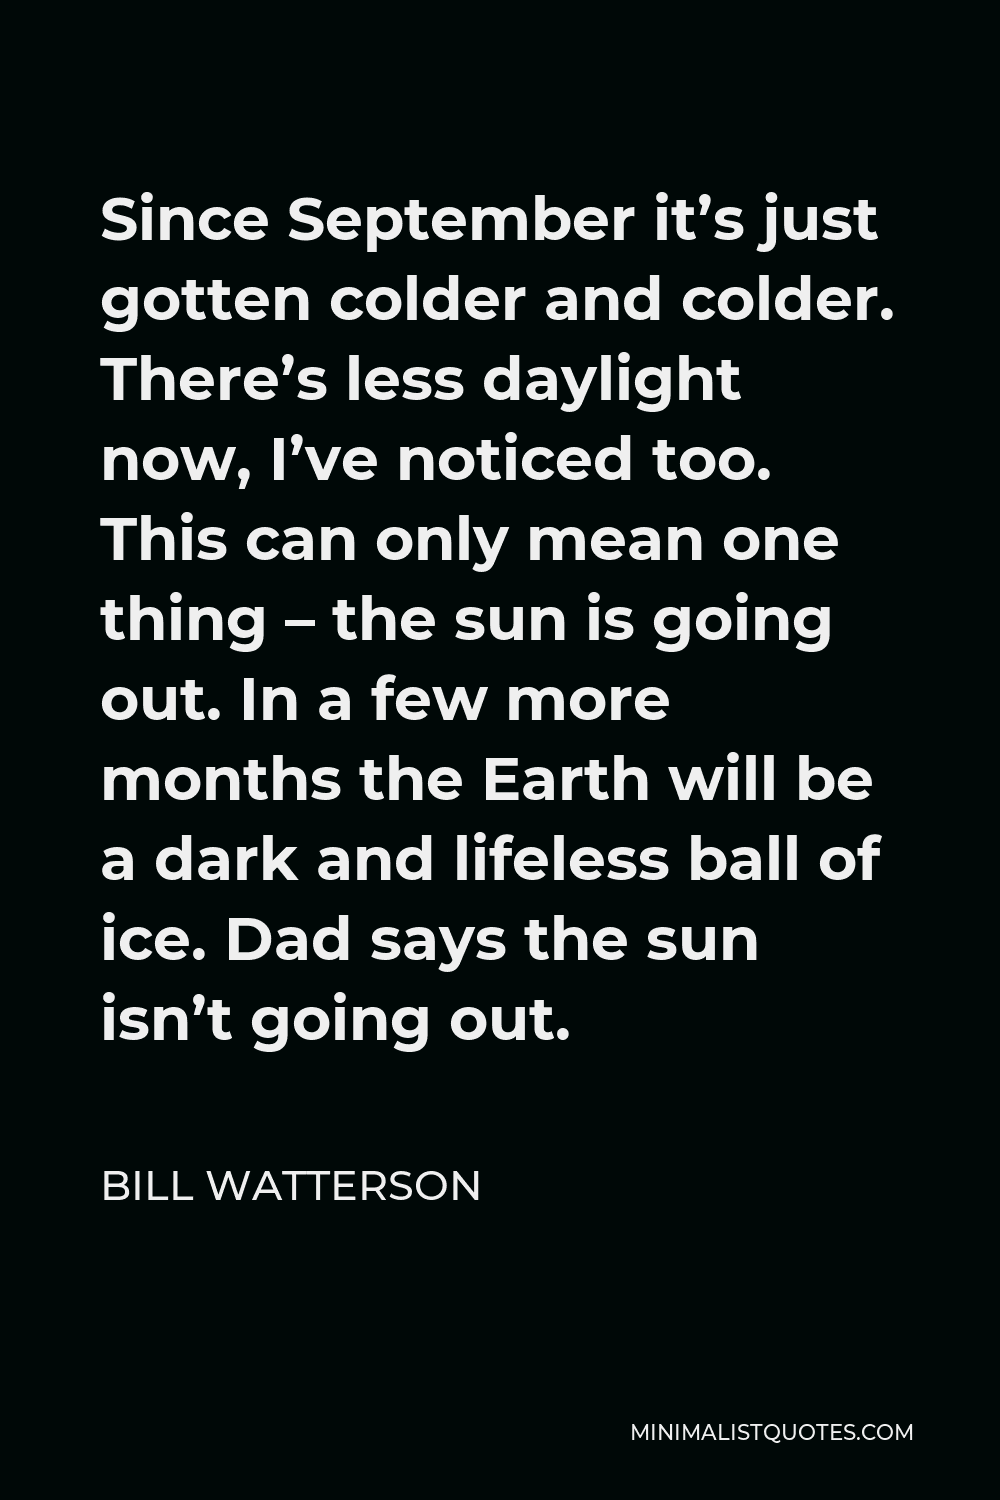 Bill Watterson Quote - Since September it’s just gotten colder and colder. There’s less daylight now, I’ve noticed too. This can only mean one thing – the sun is going out. In a few more months the Earth will be a dark and lifeless ball of ice. Dad says the sun isn’t going out.